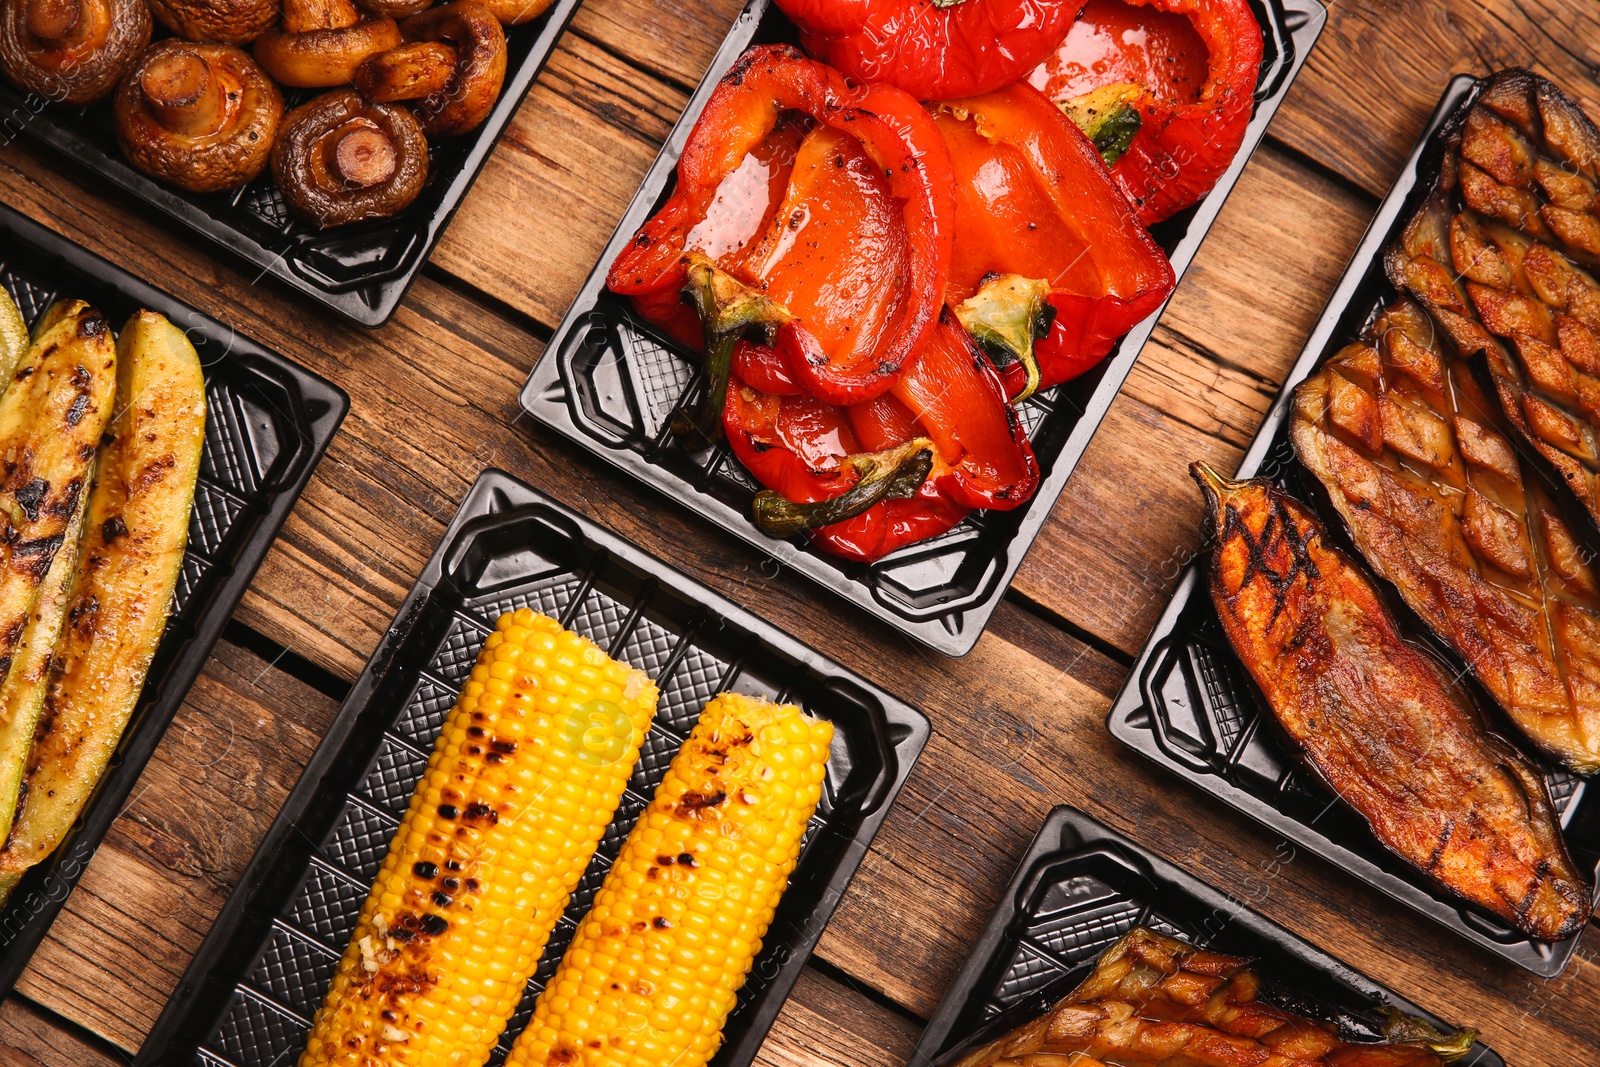 Photo of Plastic containers with different grilled meal on wooden table, flat lay. Food delivery service